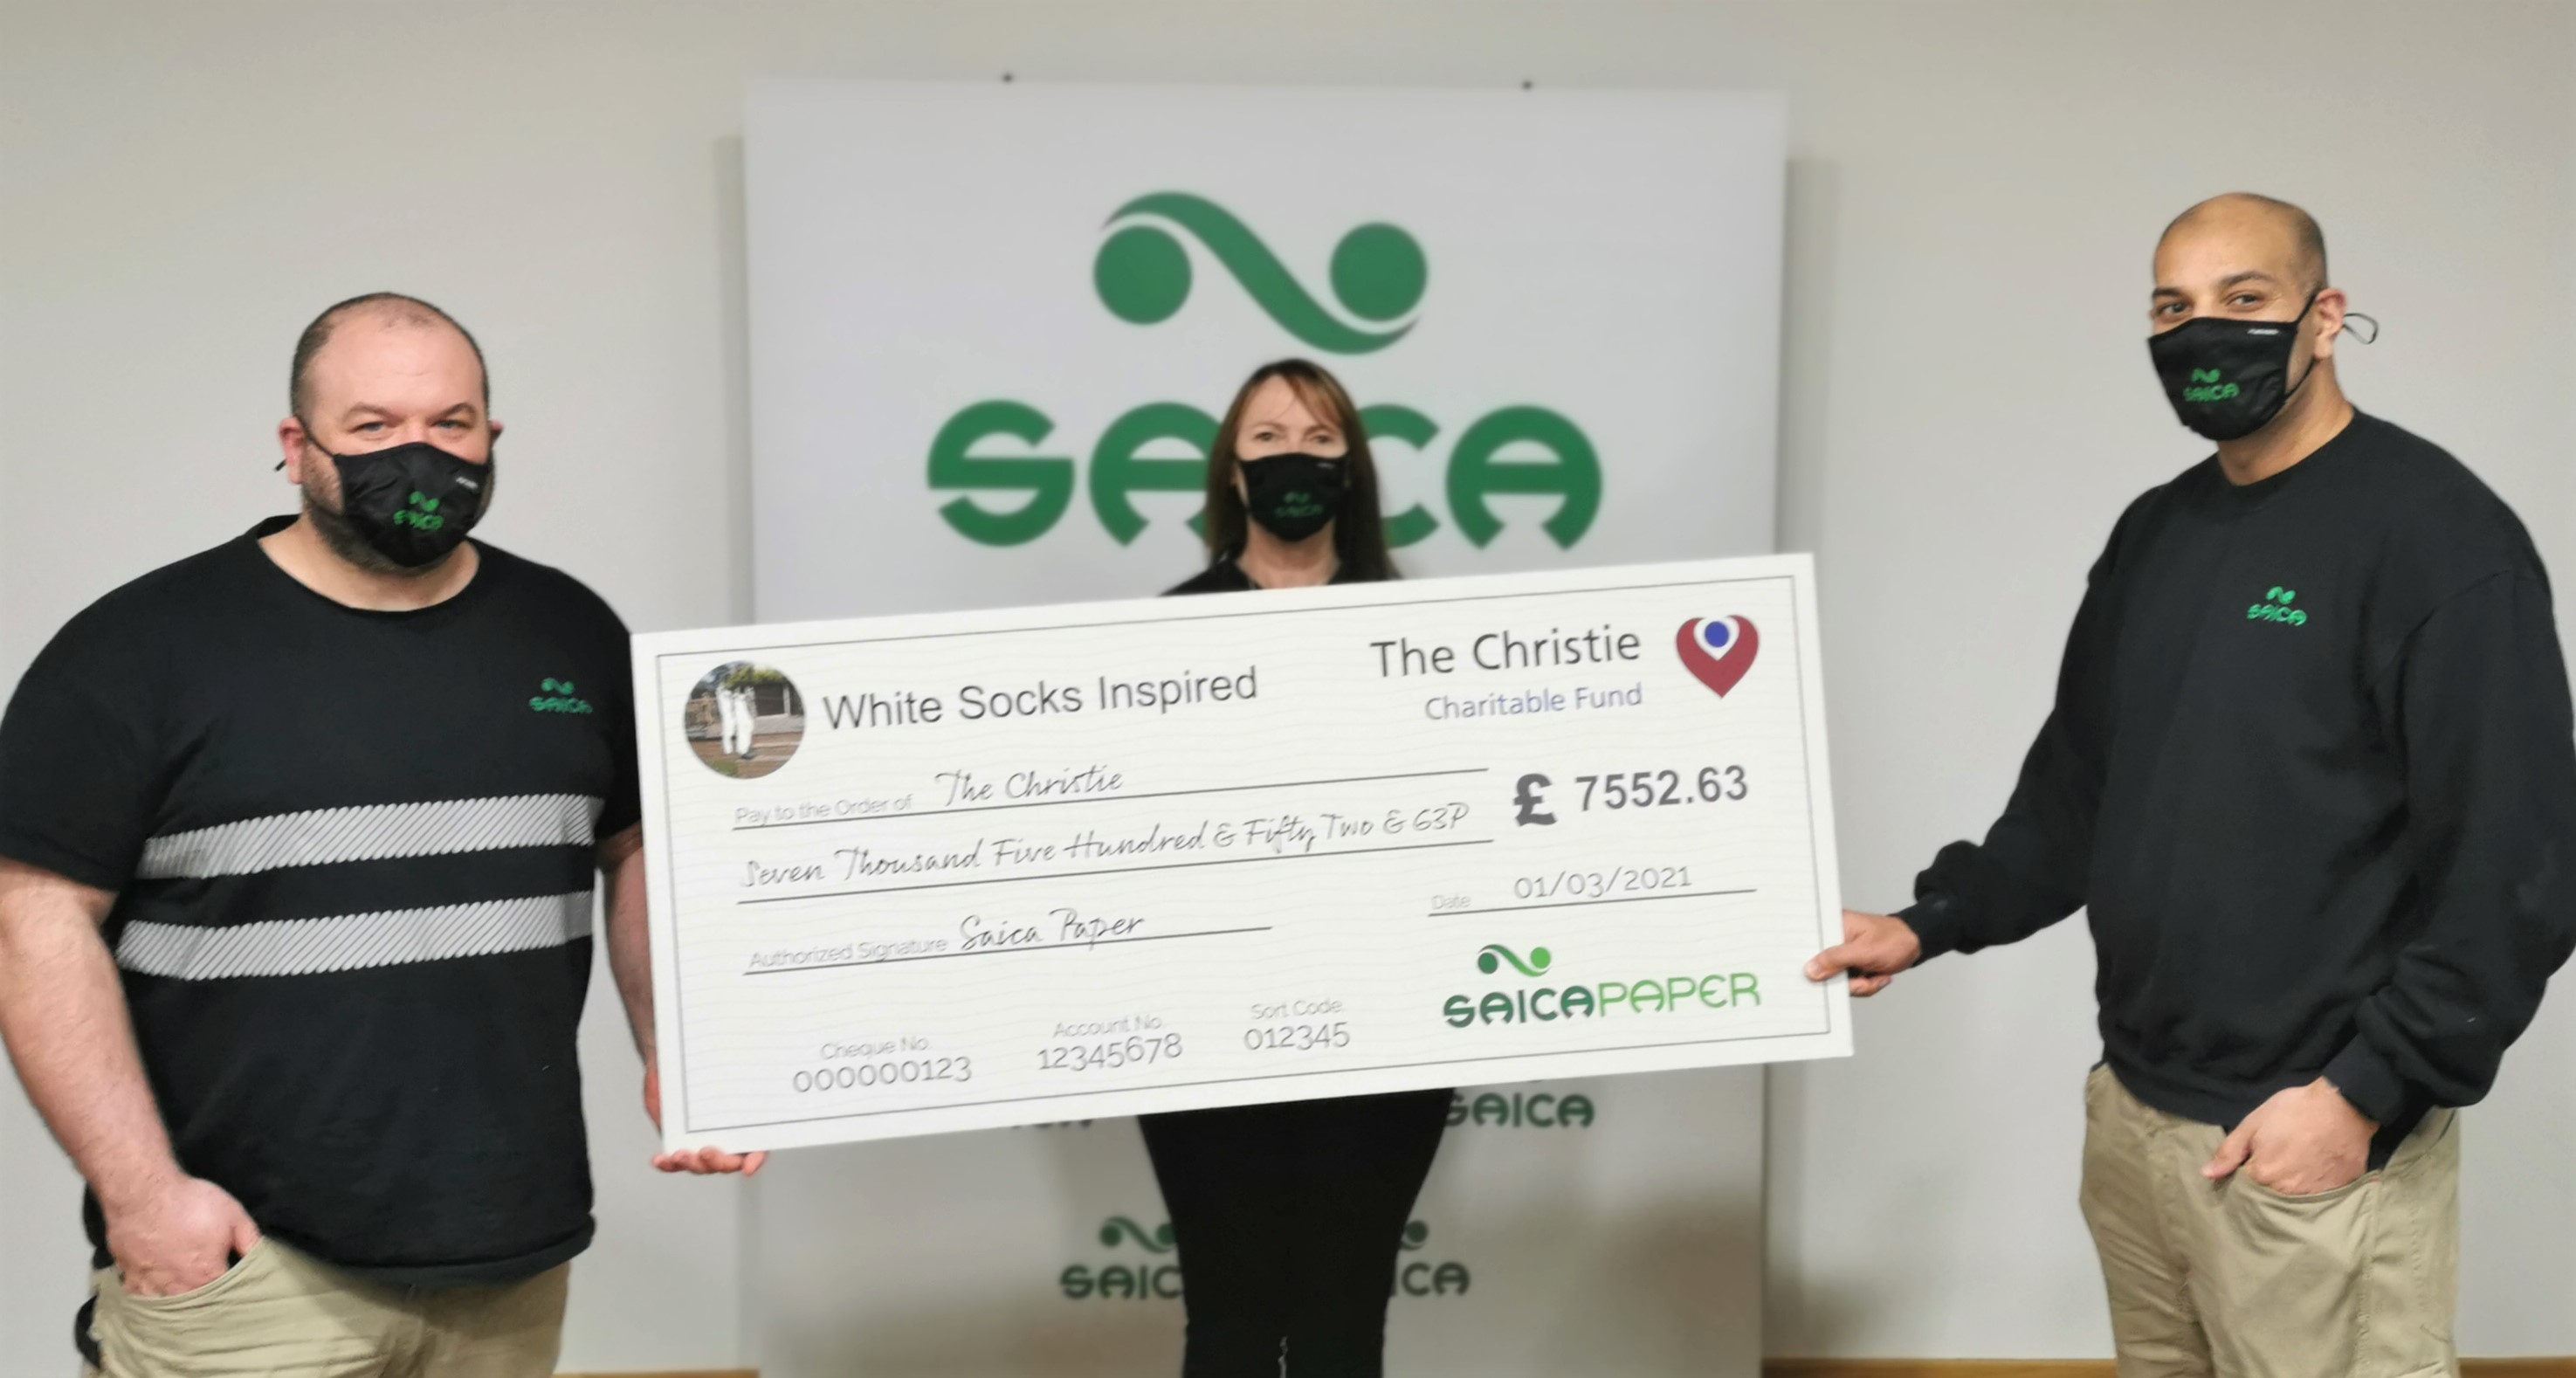 Saica Paper UK donation to The Christie charity